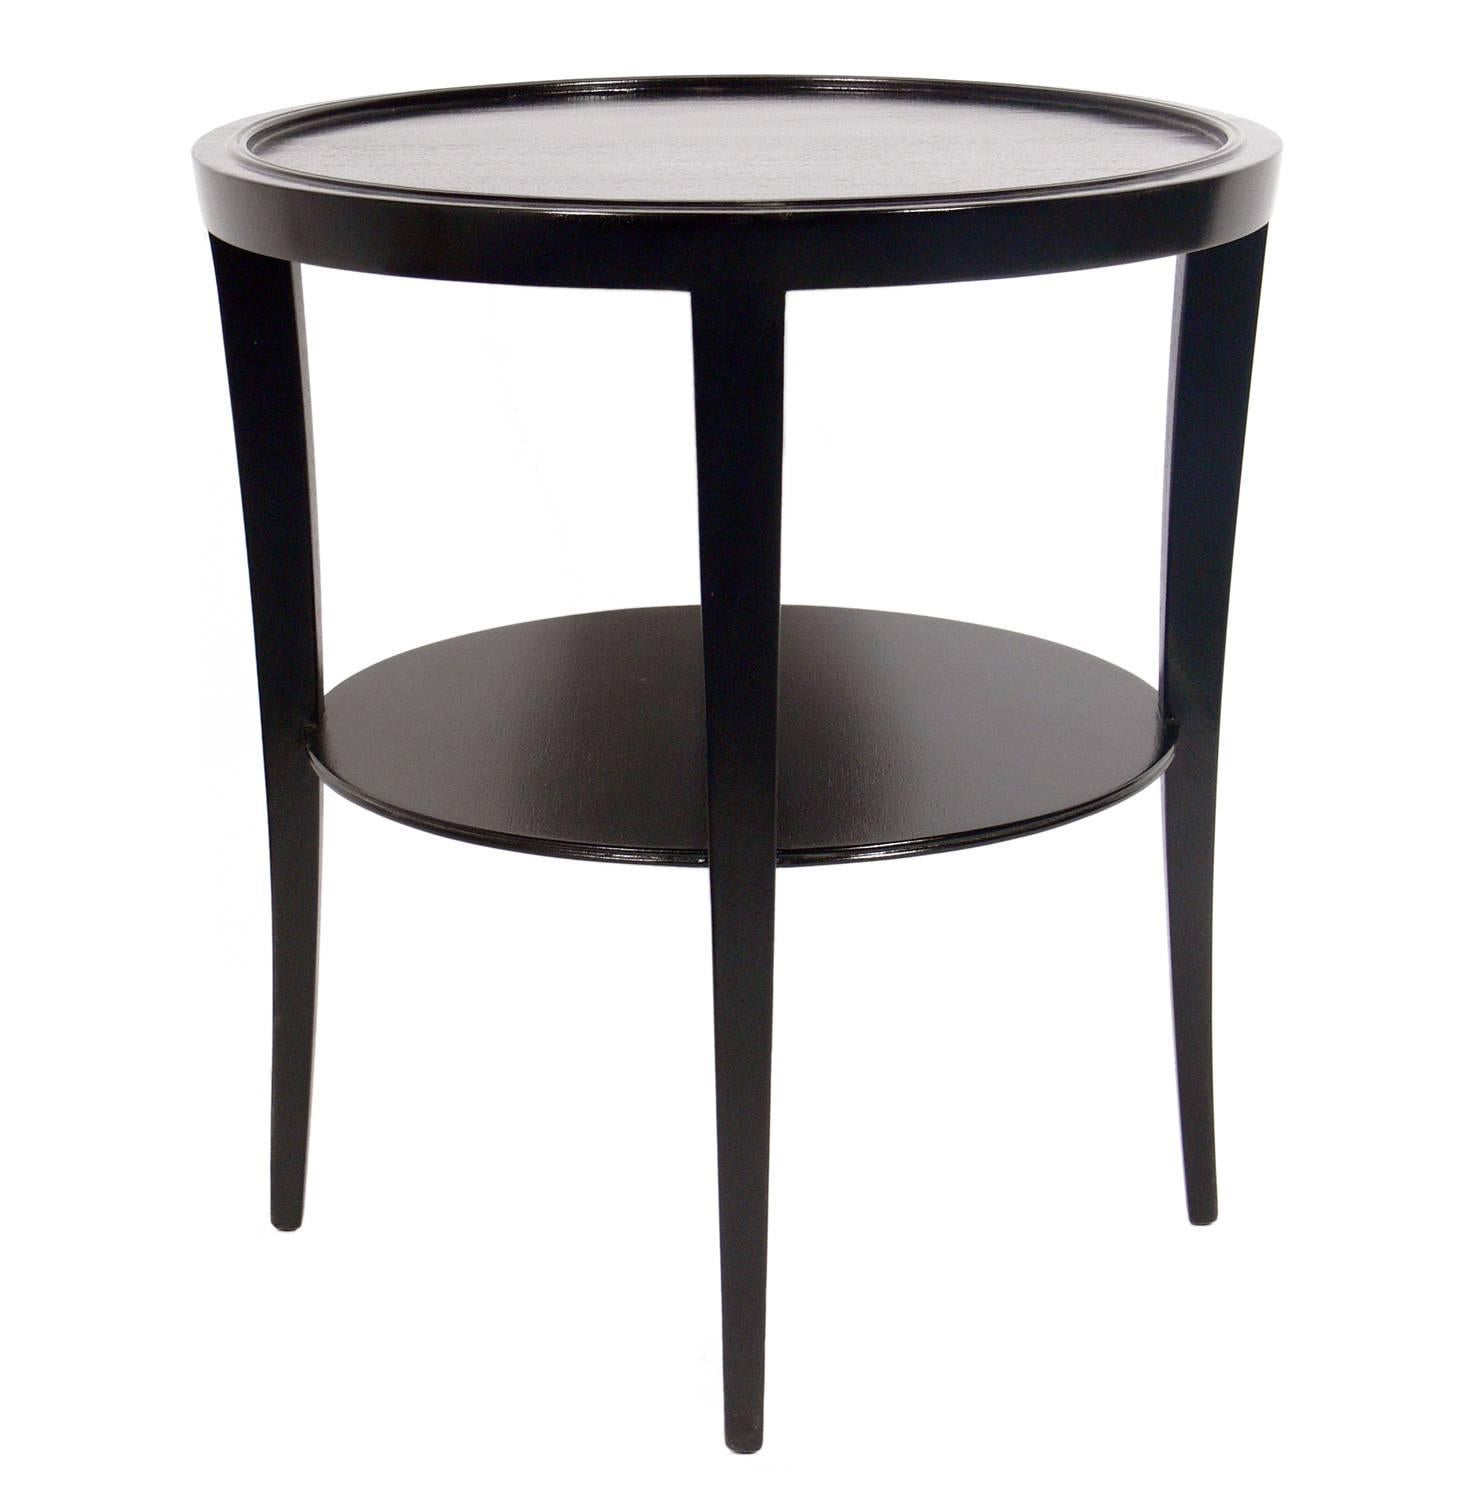 Elegant side table, designed by Tommi Parzinger for Charak Modern, American, circa 1950s. It is a versatile size and can be used as a side, centre or end table, and is perfect between a pair of chairs. The table has been refinished in black lacquer.